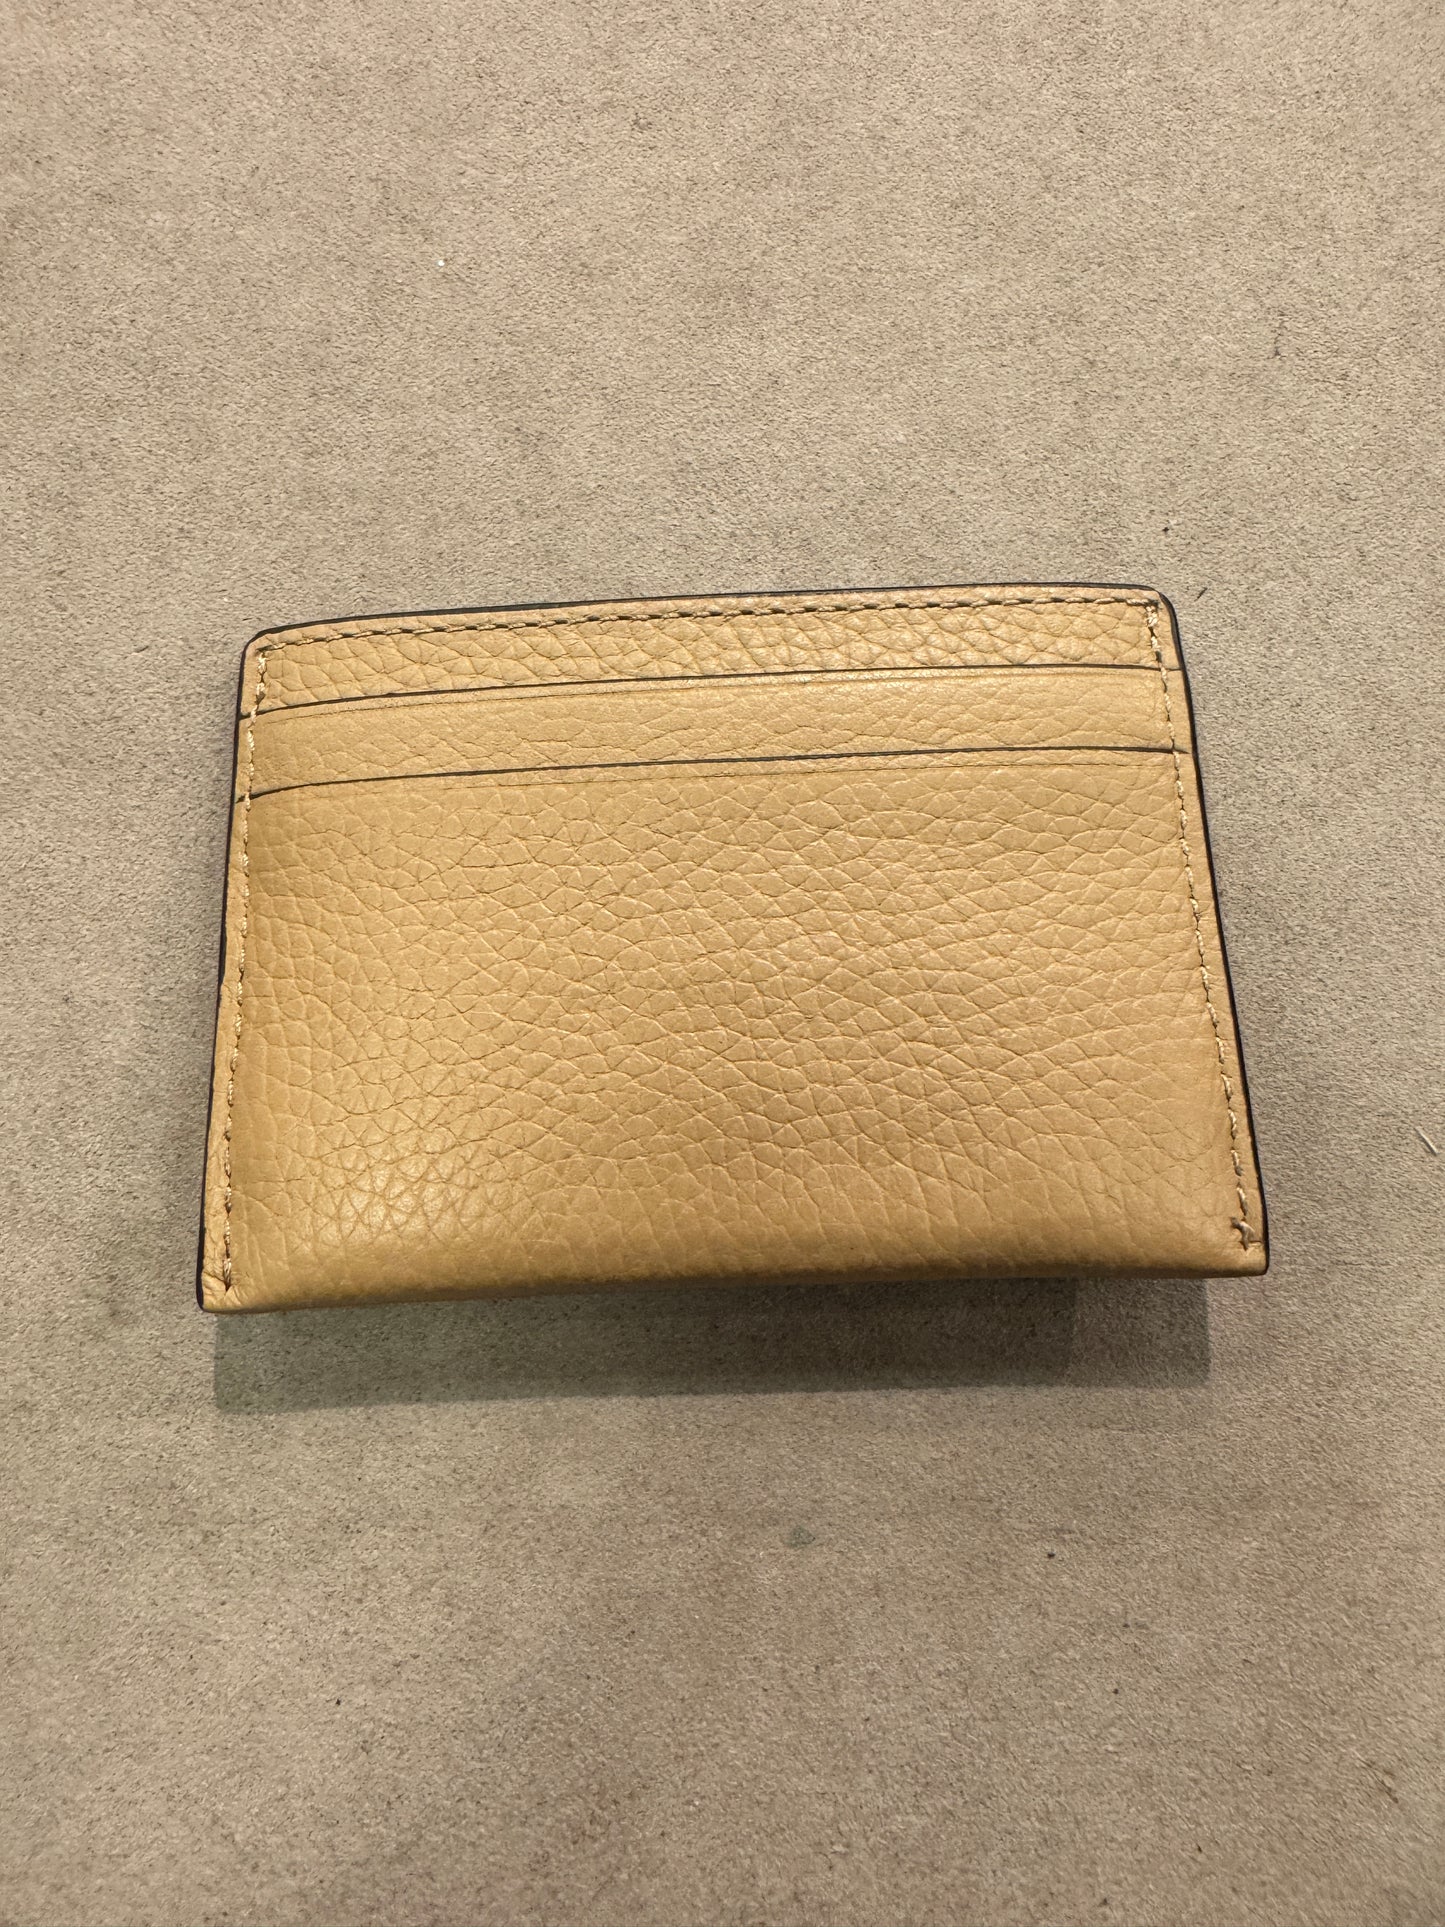 Load image into Gallery viewer, Michael Kors Reed Card Holder In Camel (Pre-order)
